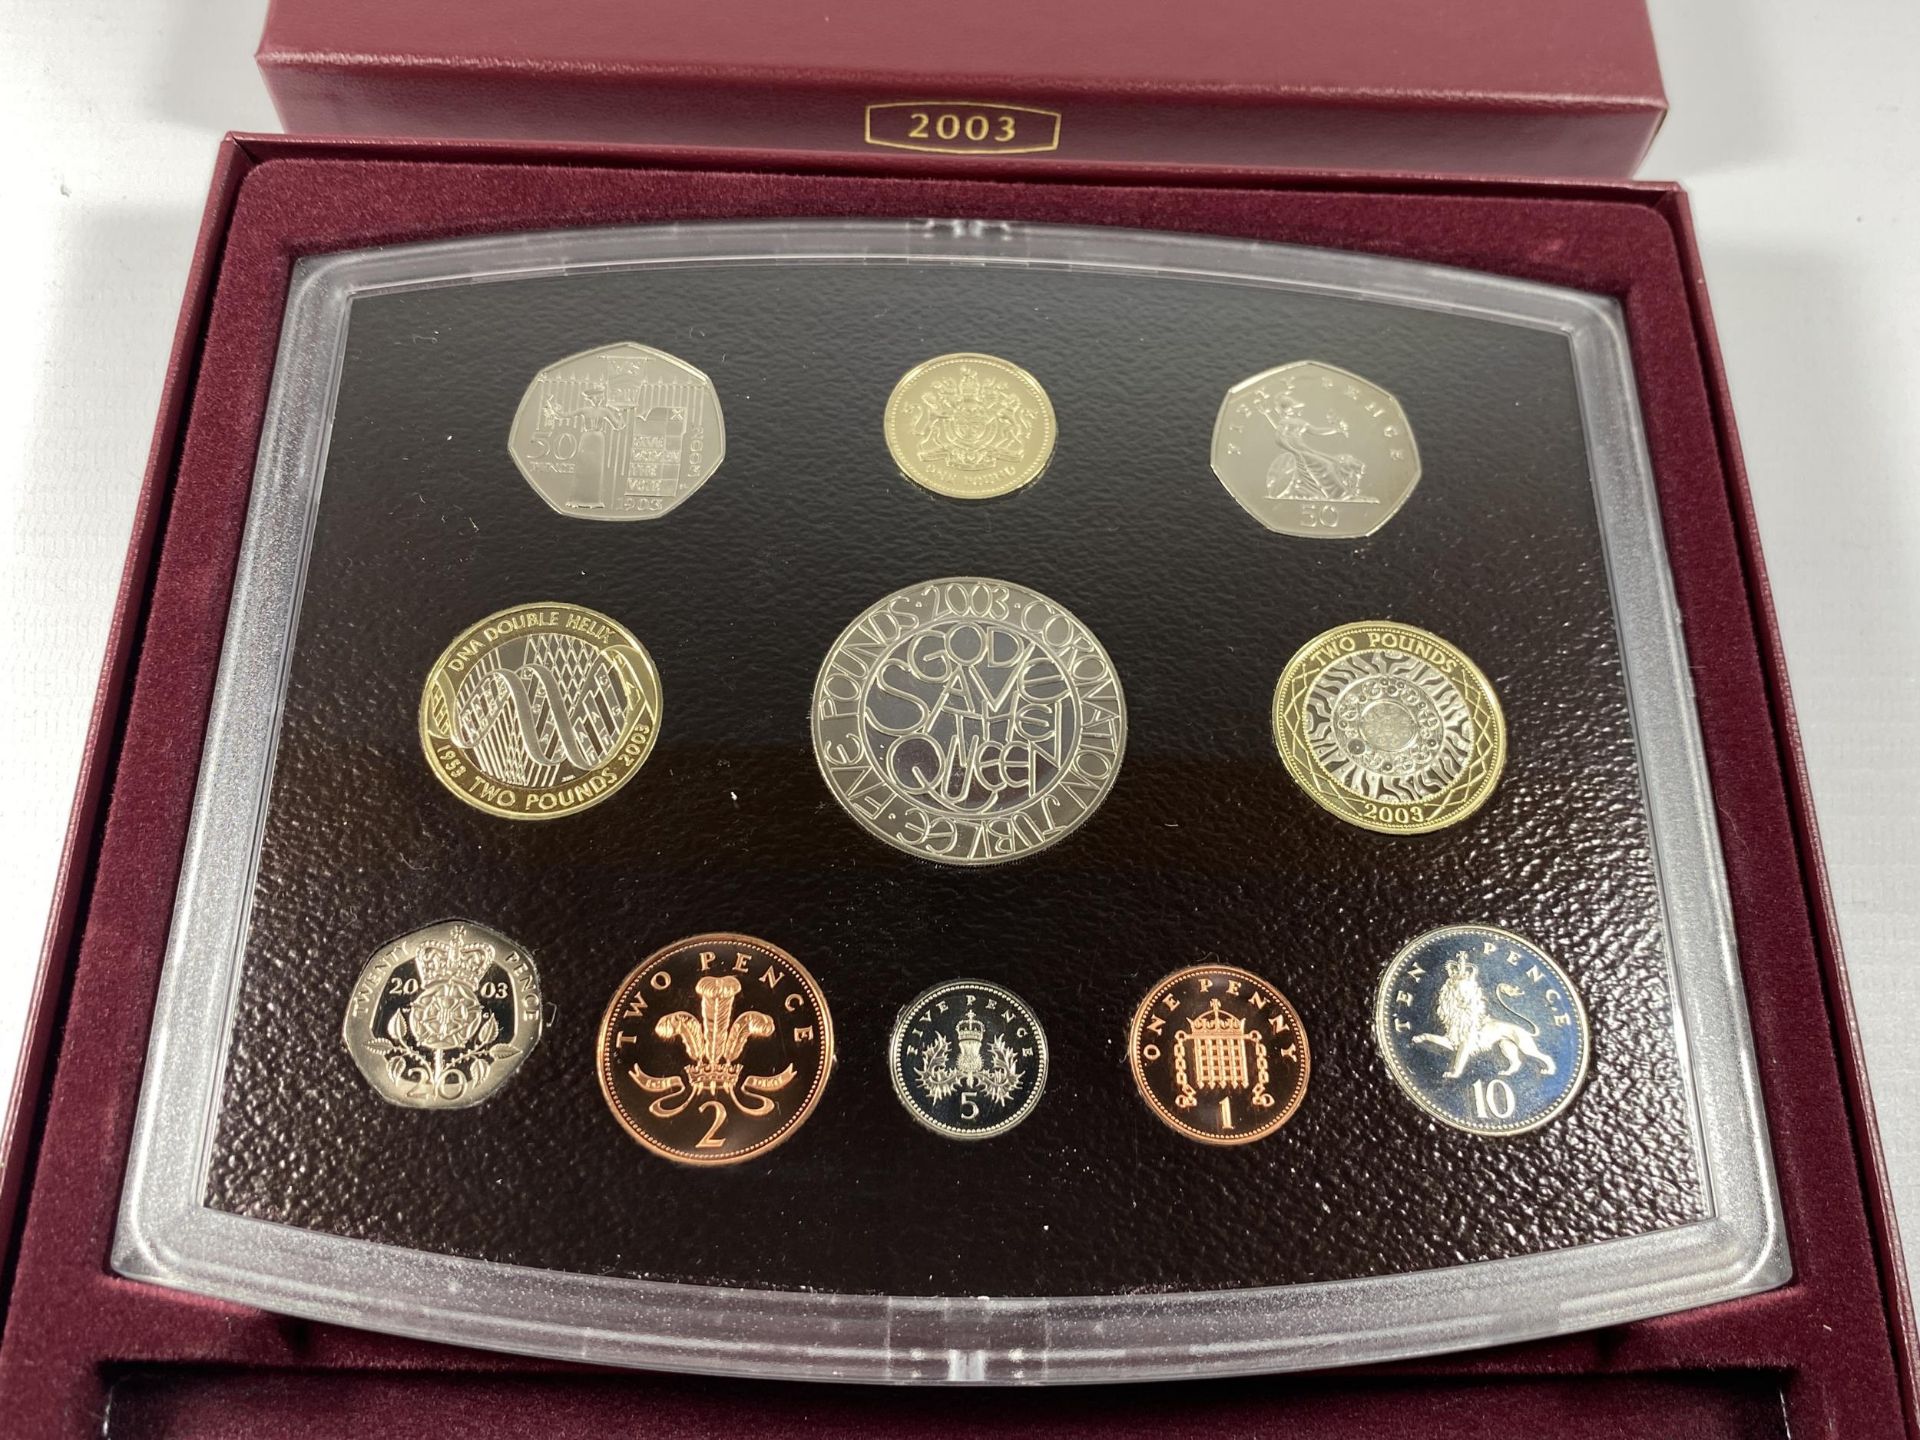 A 2003 ROYAL MINT CASED PROOF COIN SET - Image 2 of 2